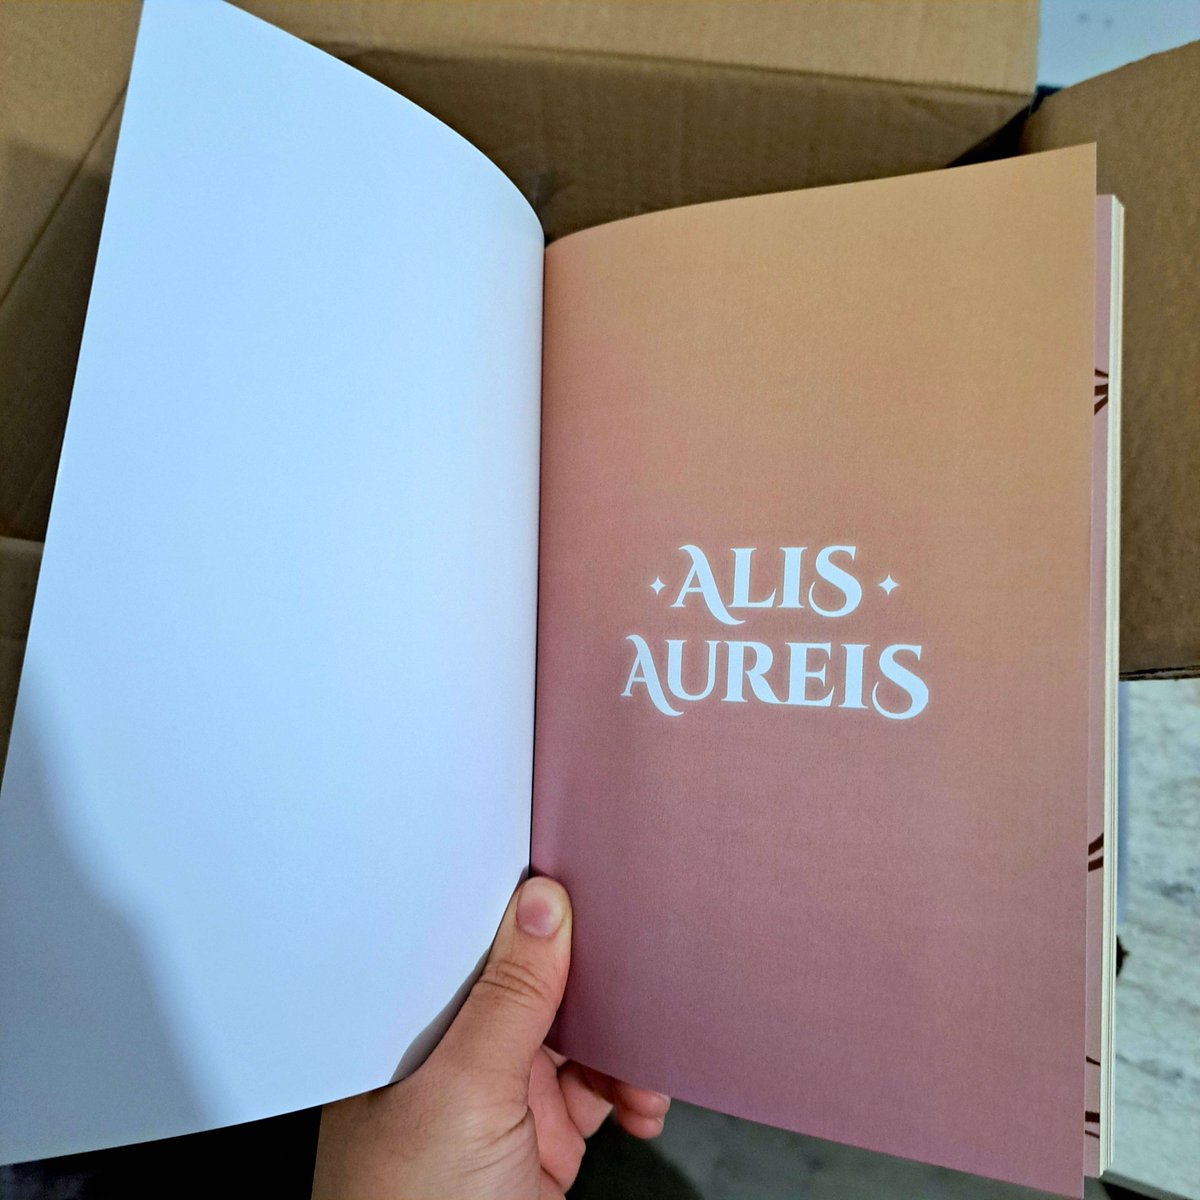 IT'S HERE!! 🤩 We've received the ALIS AUREIS books! They're just as gorgeous on the inside as they are on the outside, but that's for you to discover ✨ Stay tuned to discover the bookmarks tomorrow, and then... get ready to meet them all 👀